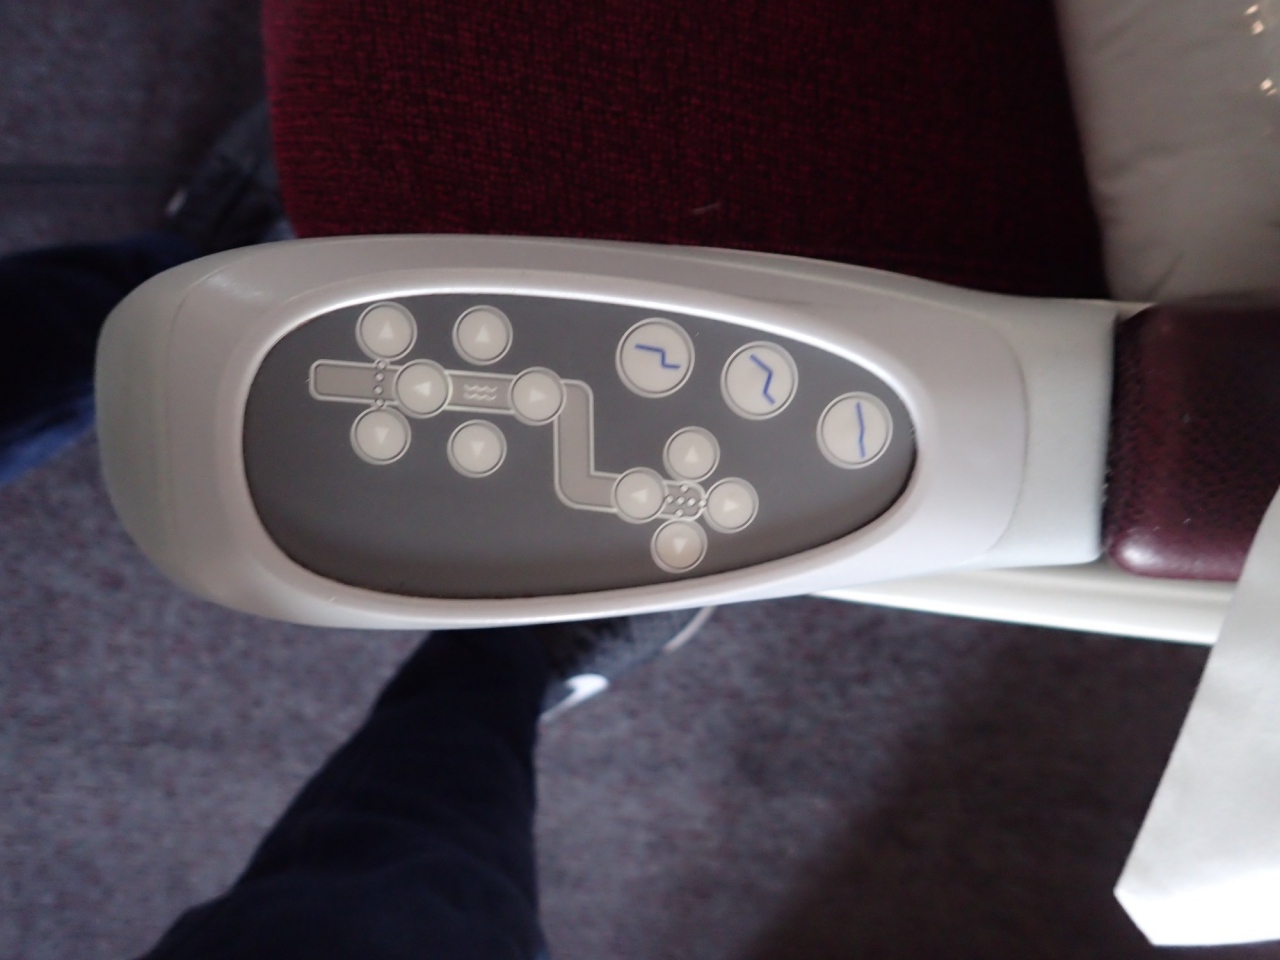 Air Italy A330 Business Class Review: Seat Controls